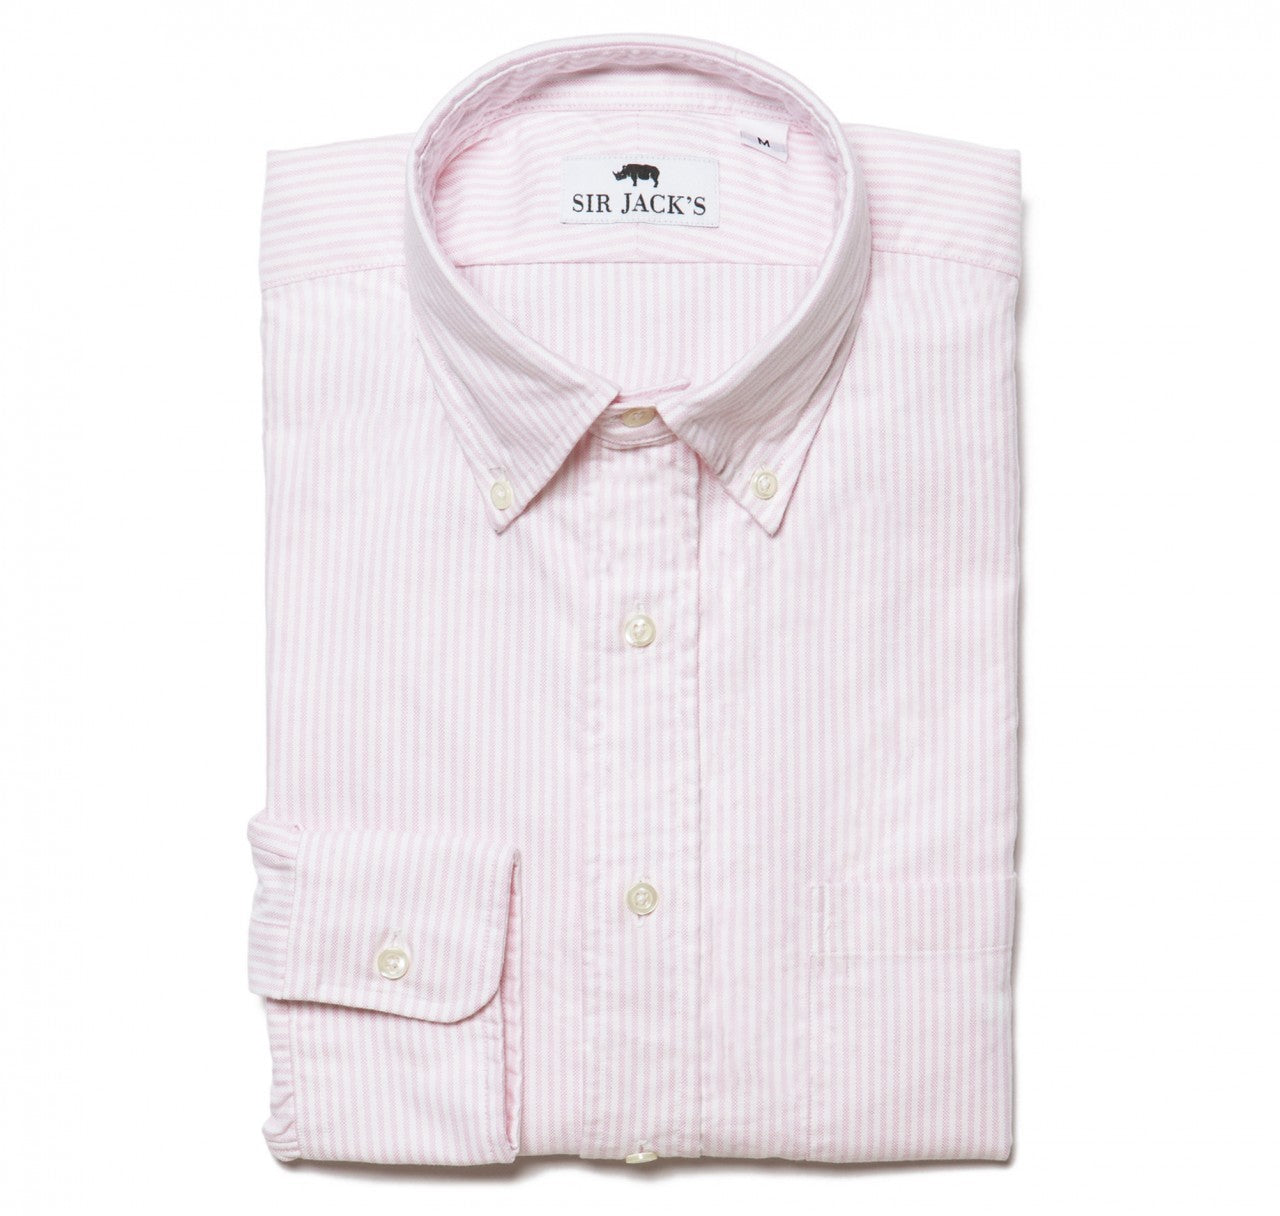 Washed Oxford Shirt in Pink & White Stripe